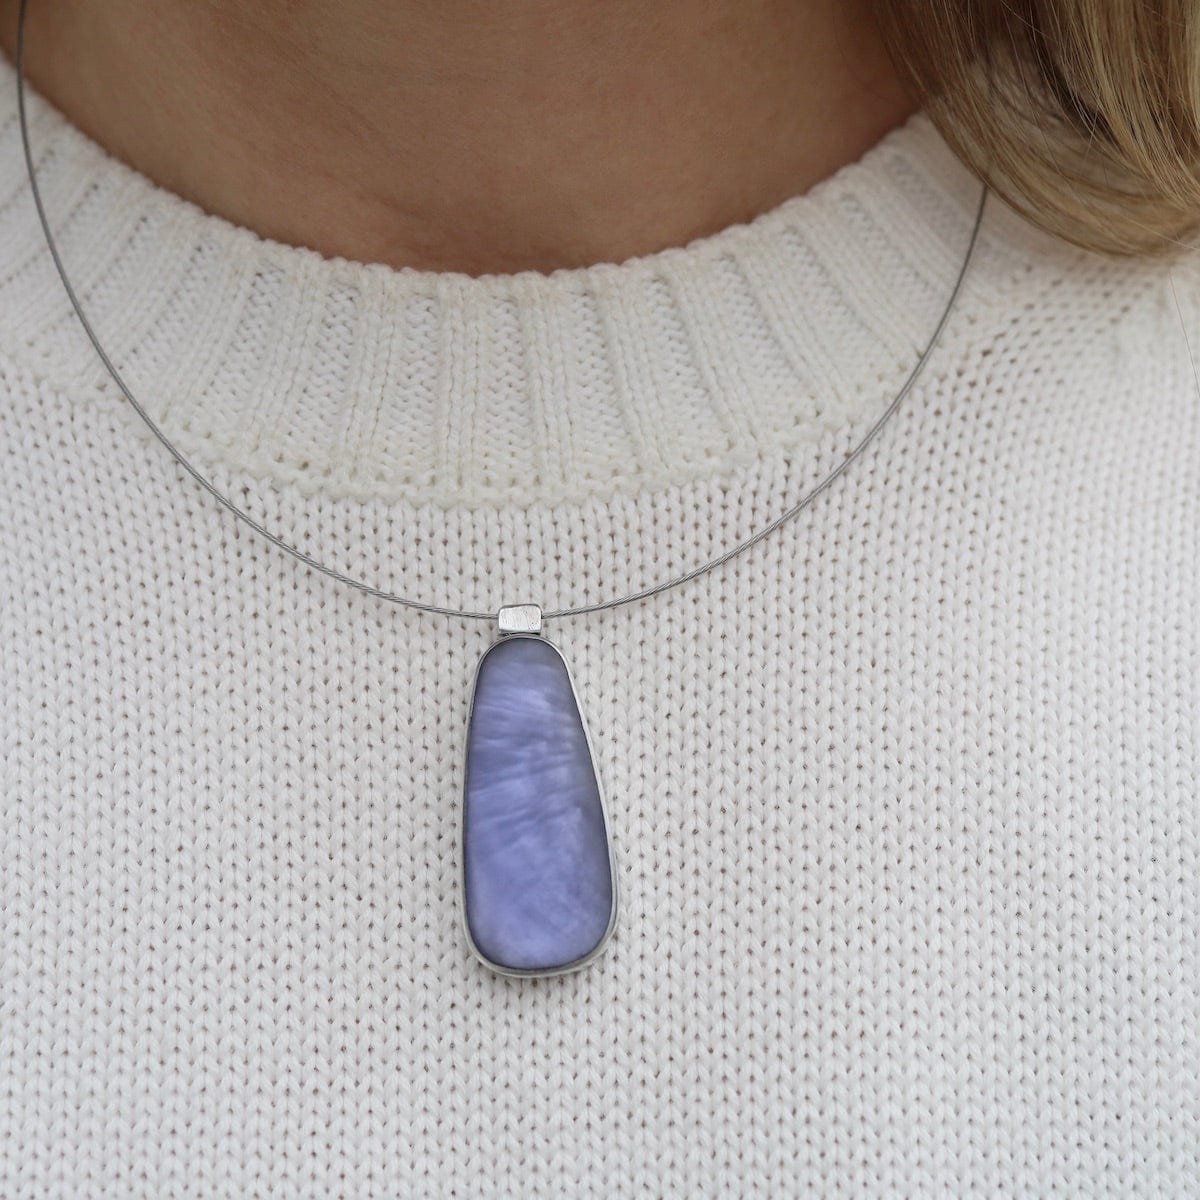 NKL Periwinkle Oval Pendant Necklace